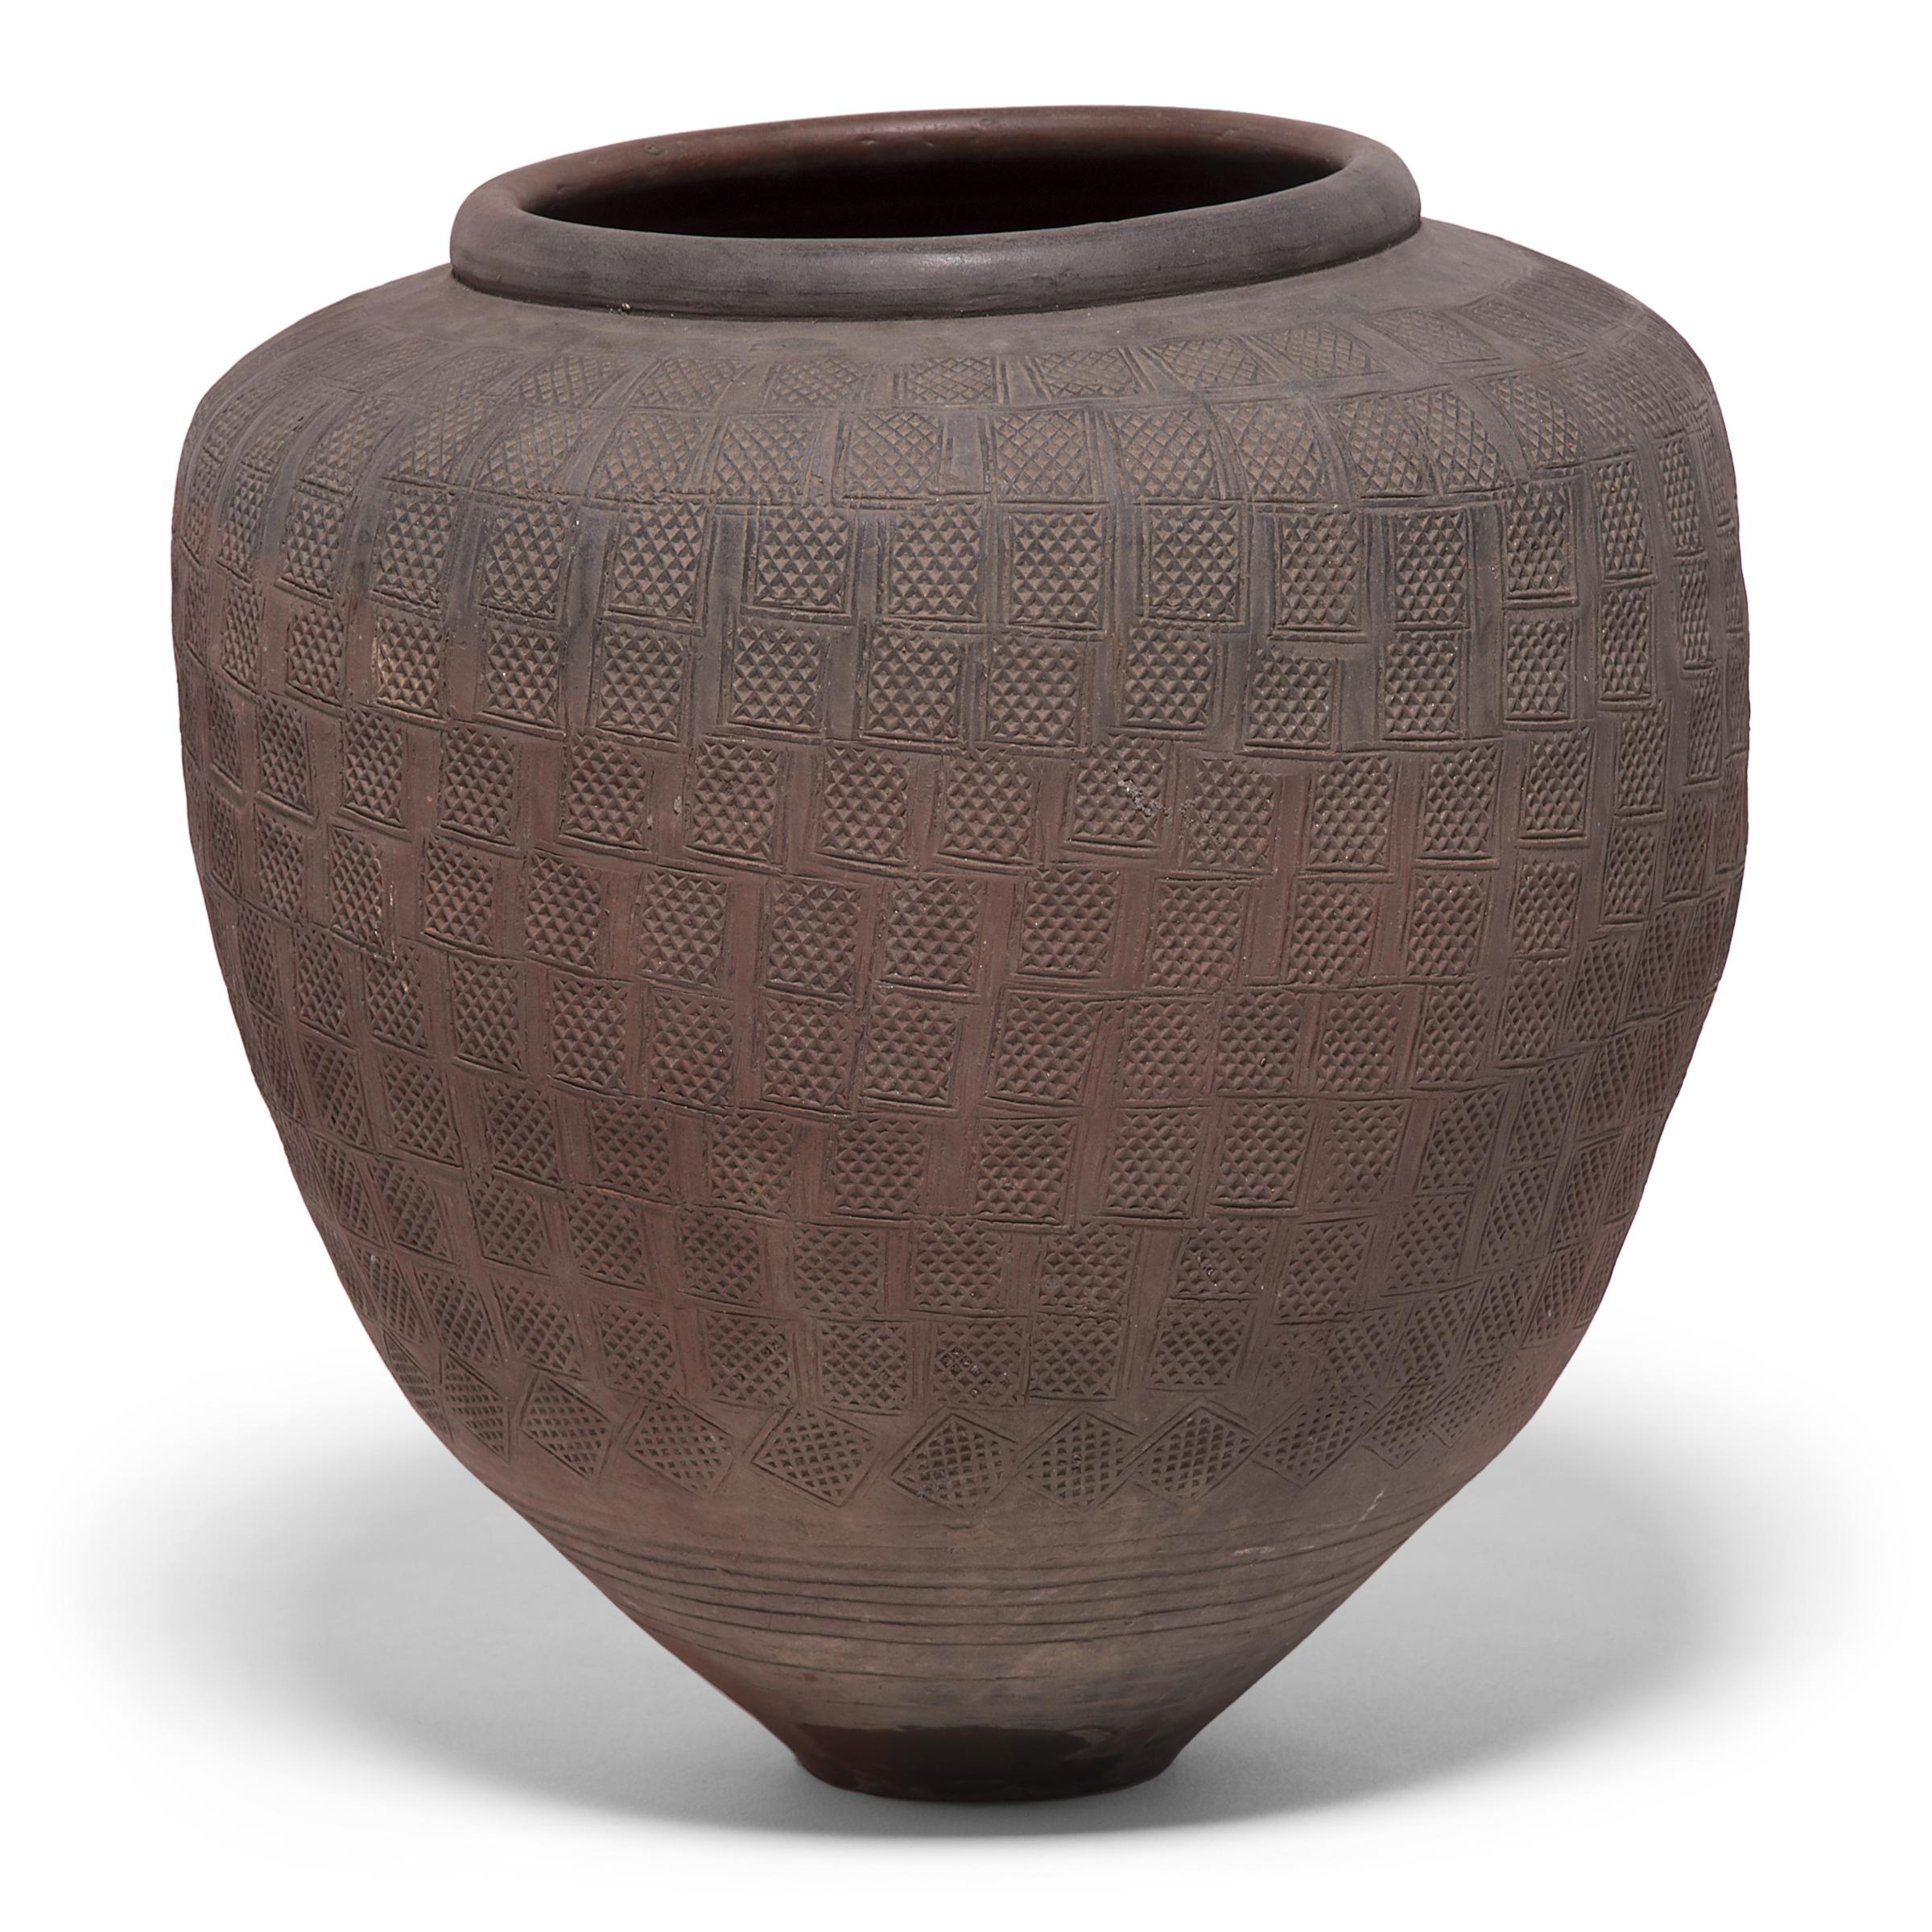 Charged with the humble task of pickling vegetables, this capacious earthenware jar is distinguished by its remarkable stamp pattern. Pressing a square stamp incised with a geometric pattern, the potter layered and staggered impressions to enliven